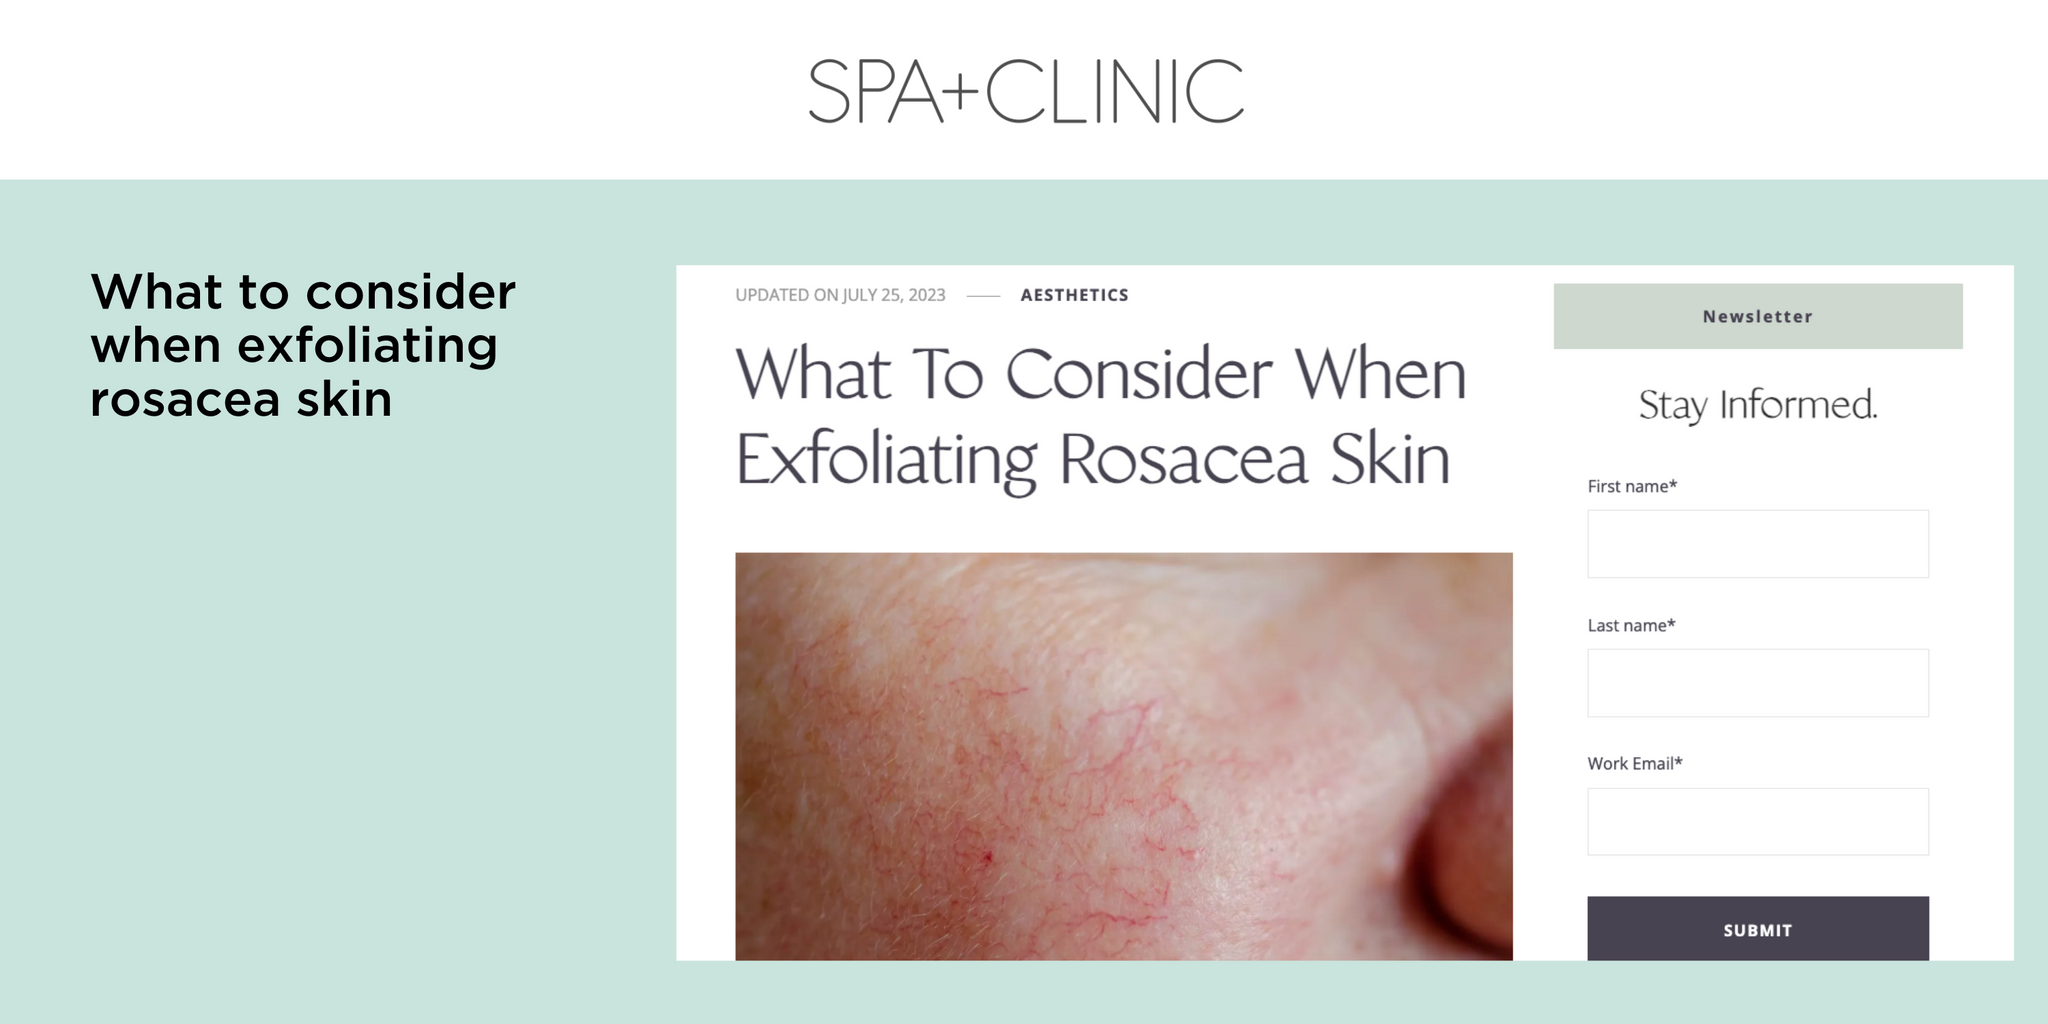 What to consider when exfoliating rosacea skin